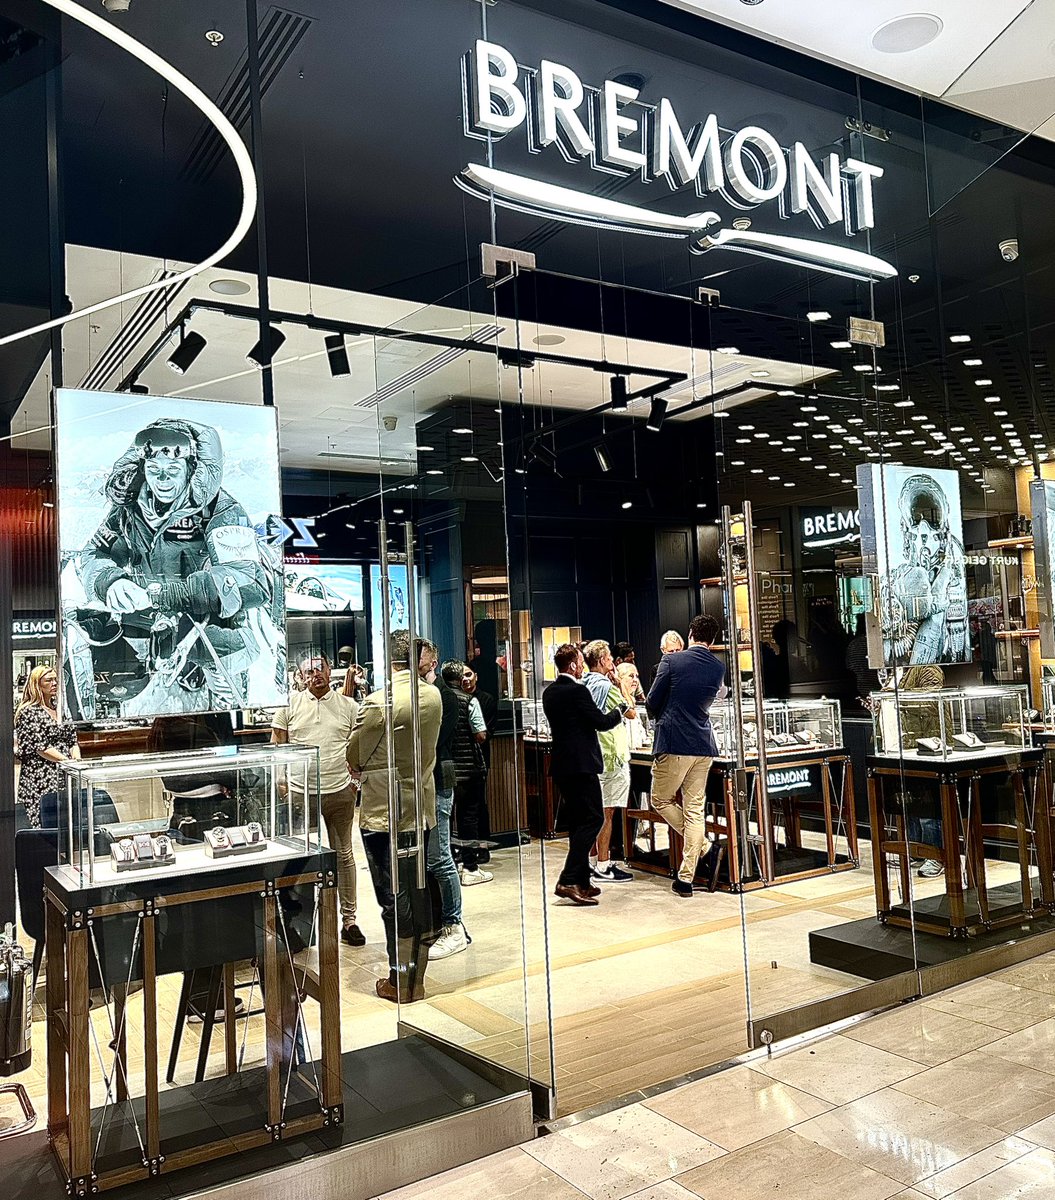 Pleased to announce our NEW STORE @westfieldlondon please pop in and say hello 👋 @bremont